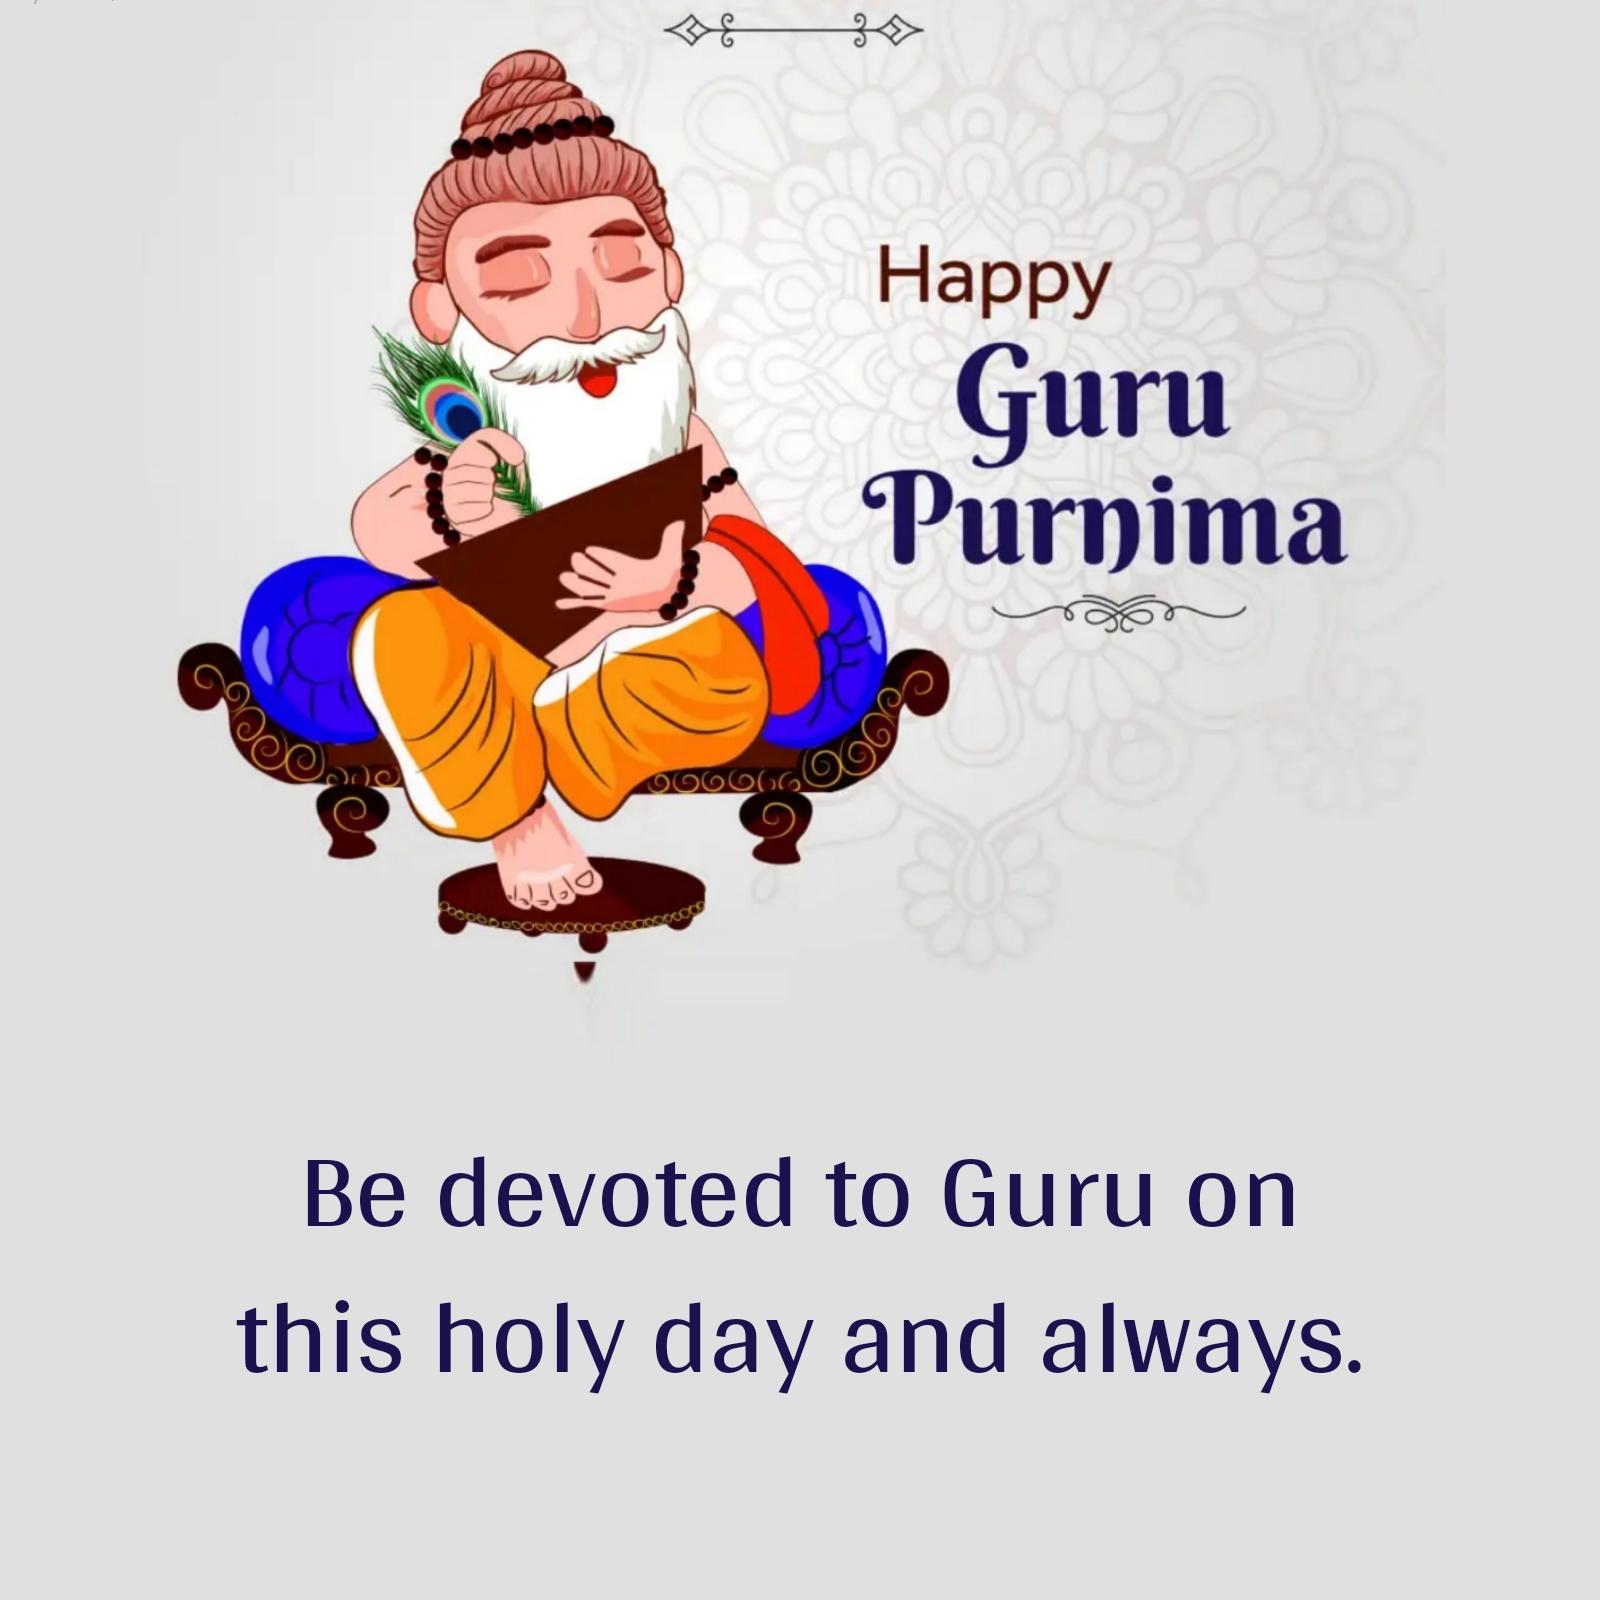 Be devoted to Guru on this holy day and always